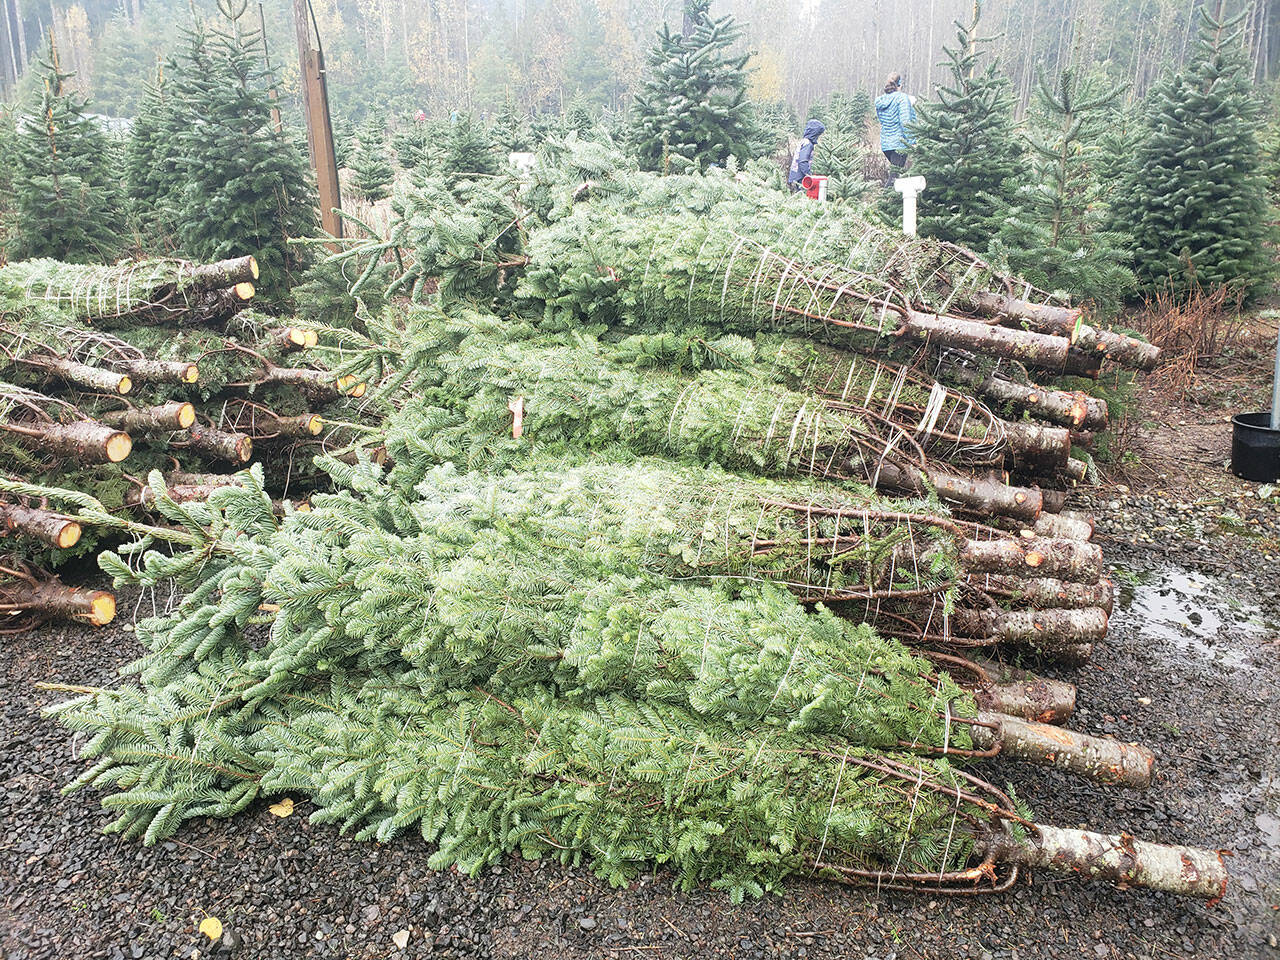 A pile of Christmas trees.